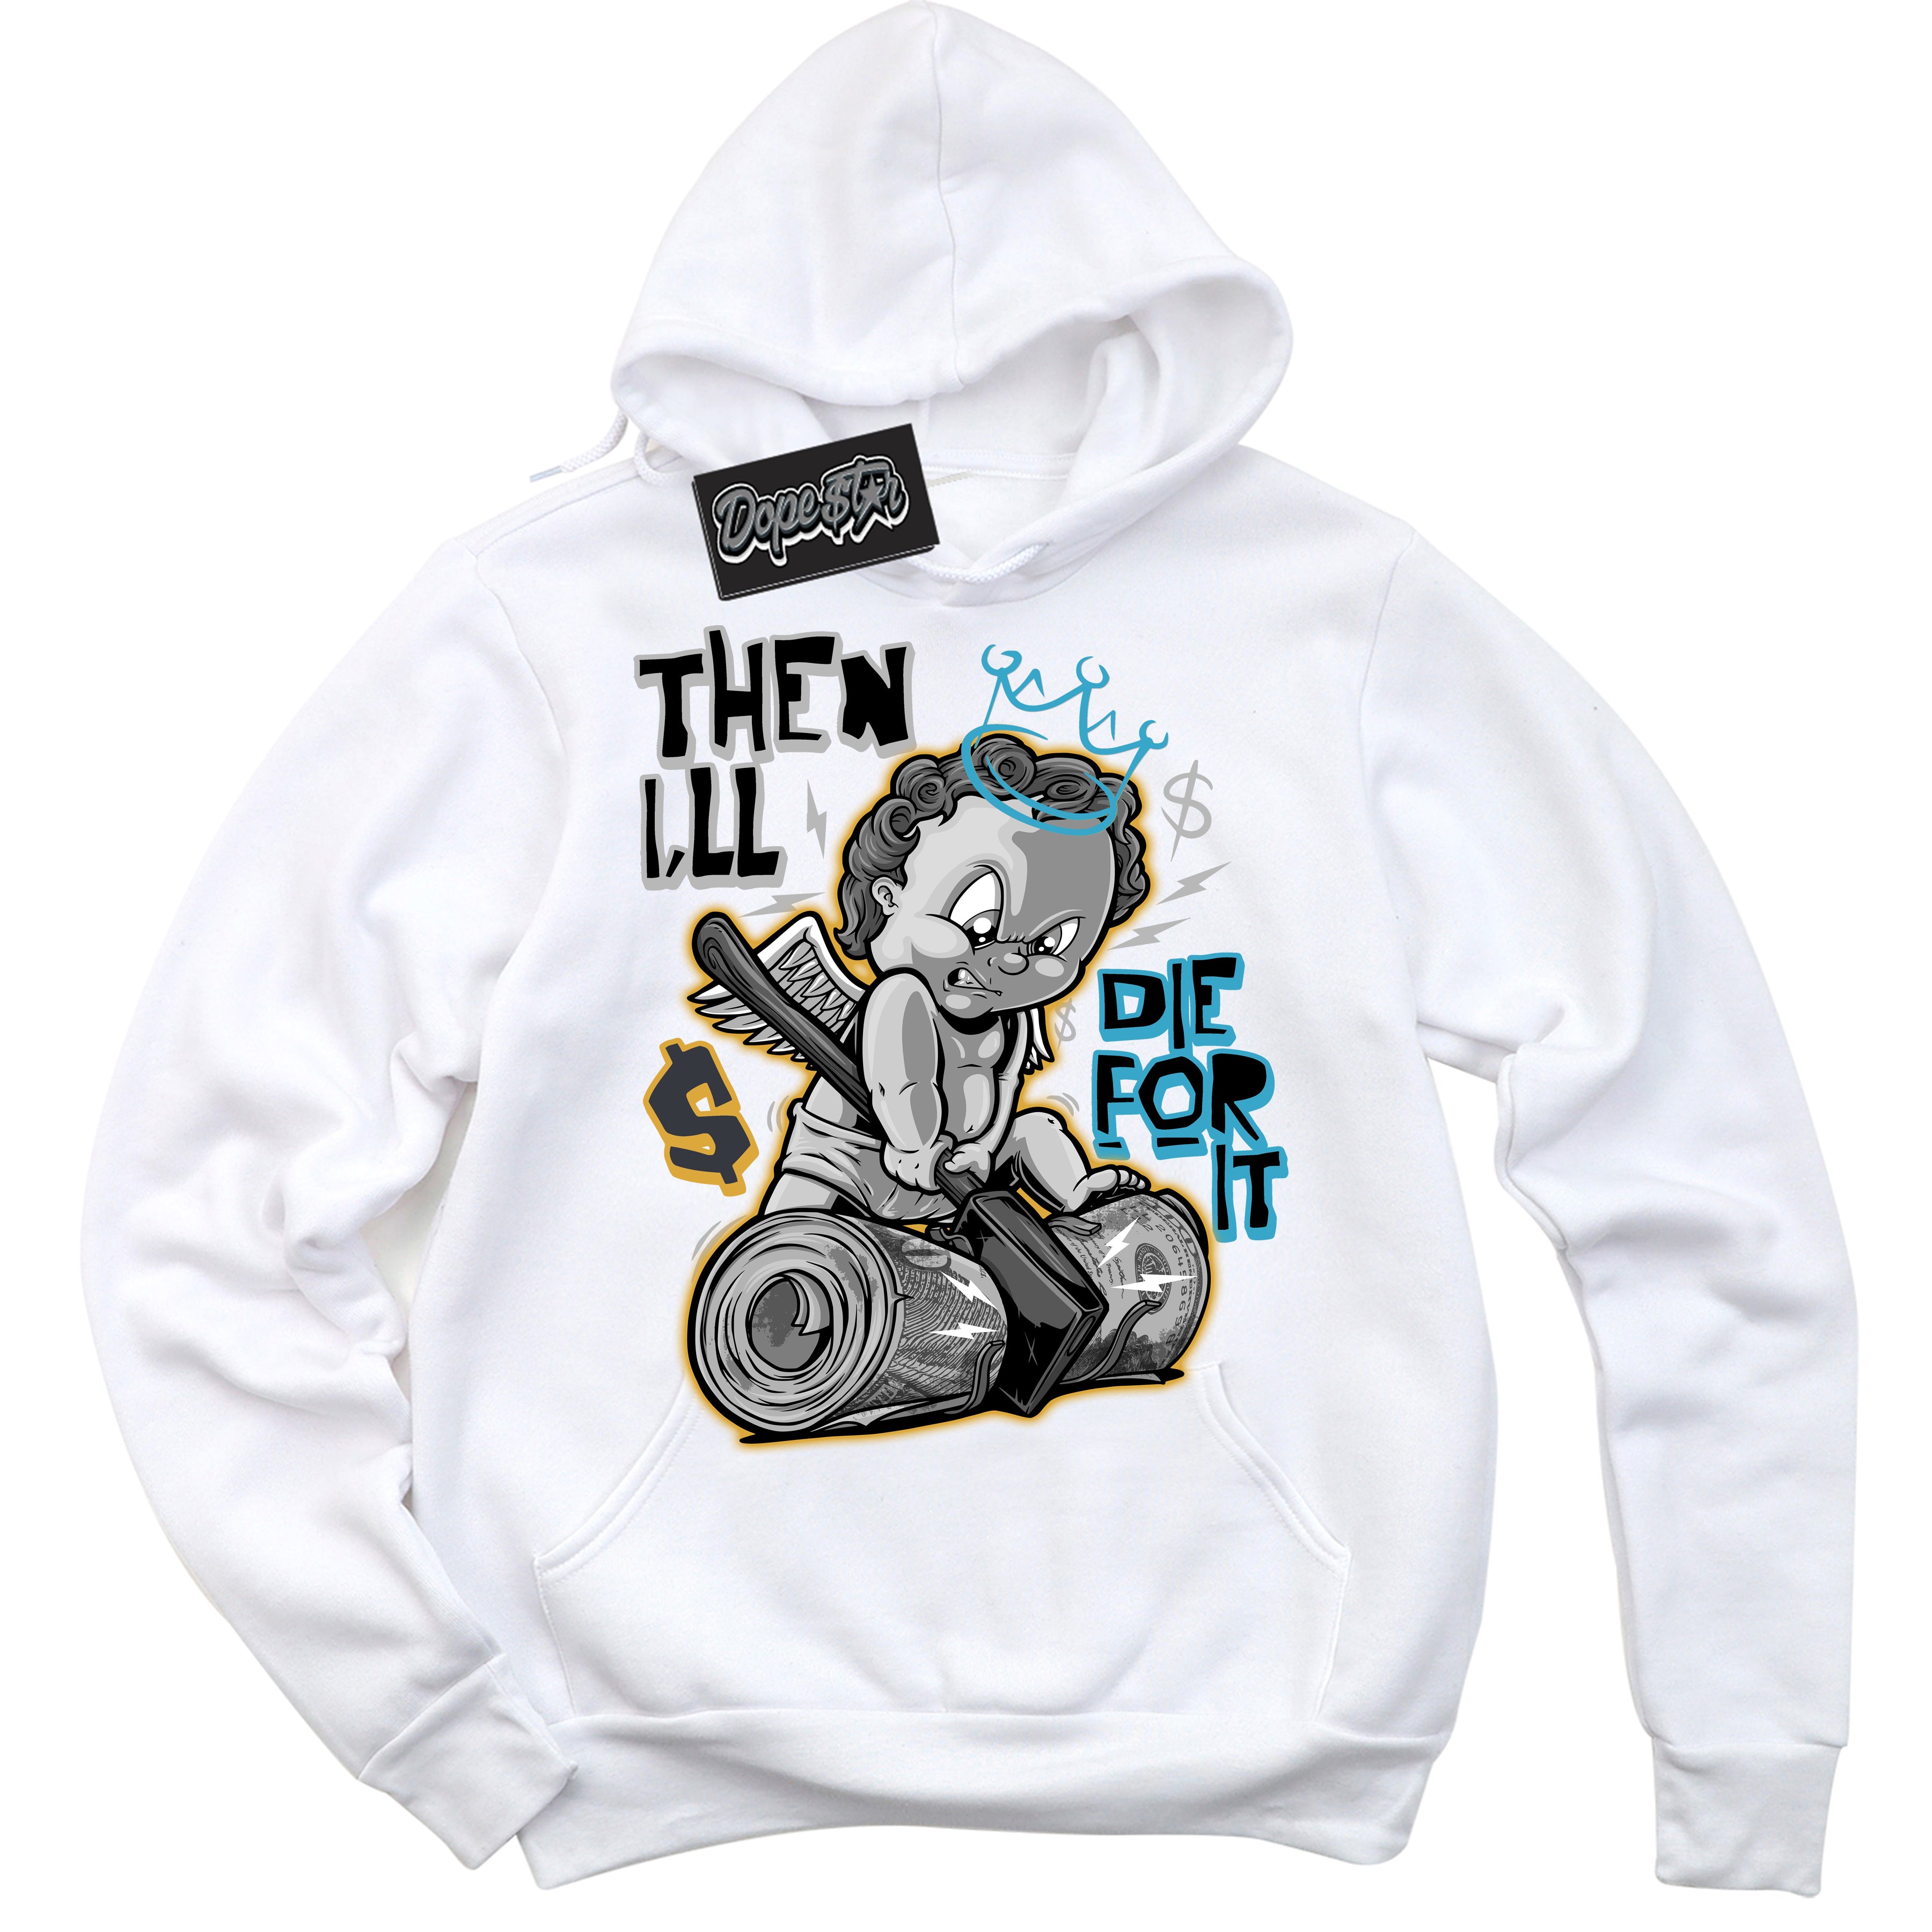 Cool White Hoodie with “ Then I'll ”  design that Perfectly Matches Aqua 5s Sneakers.